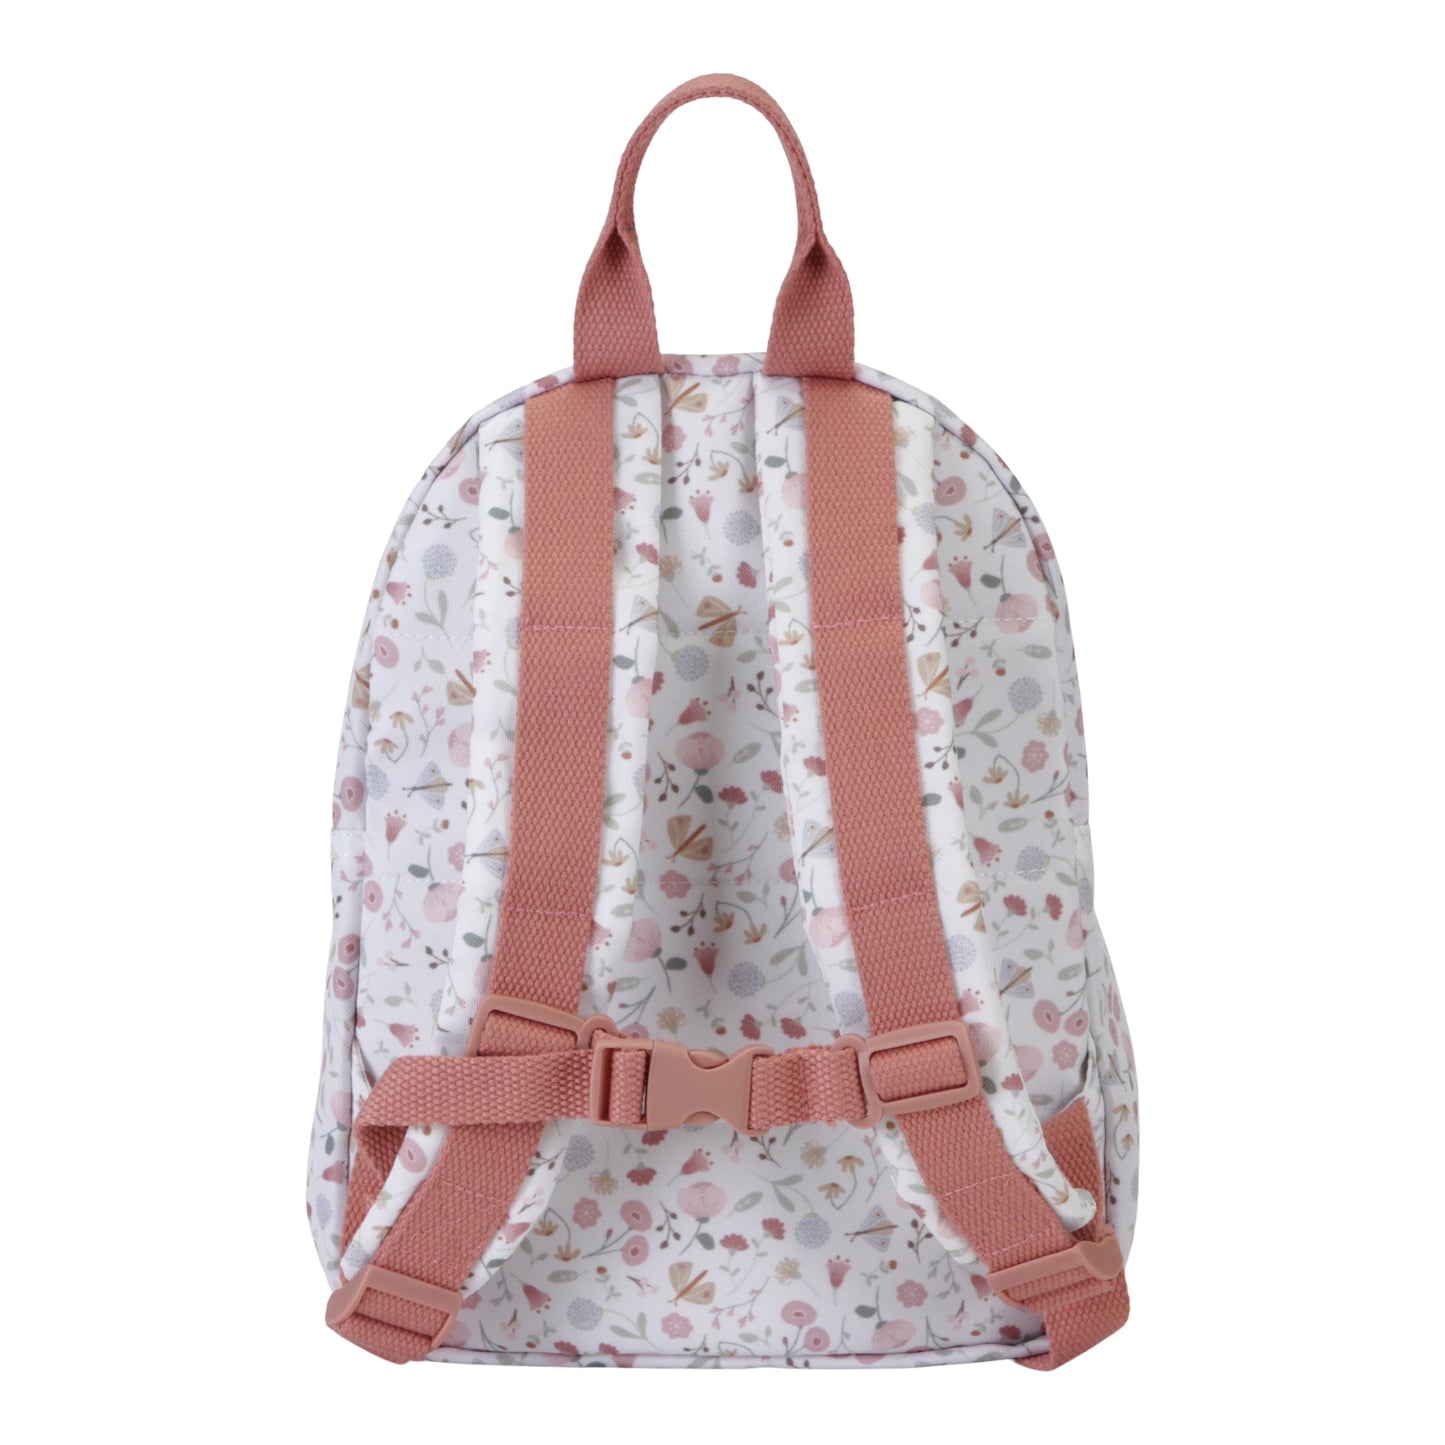 Kids Backpack Flowers and Butterflies